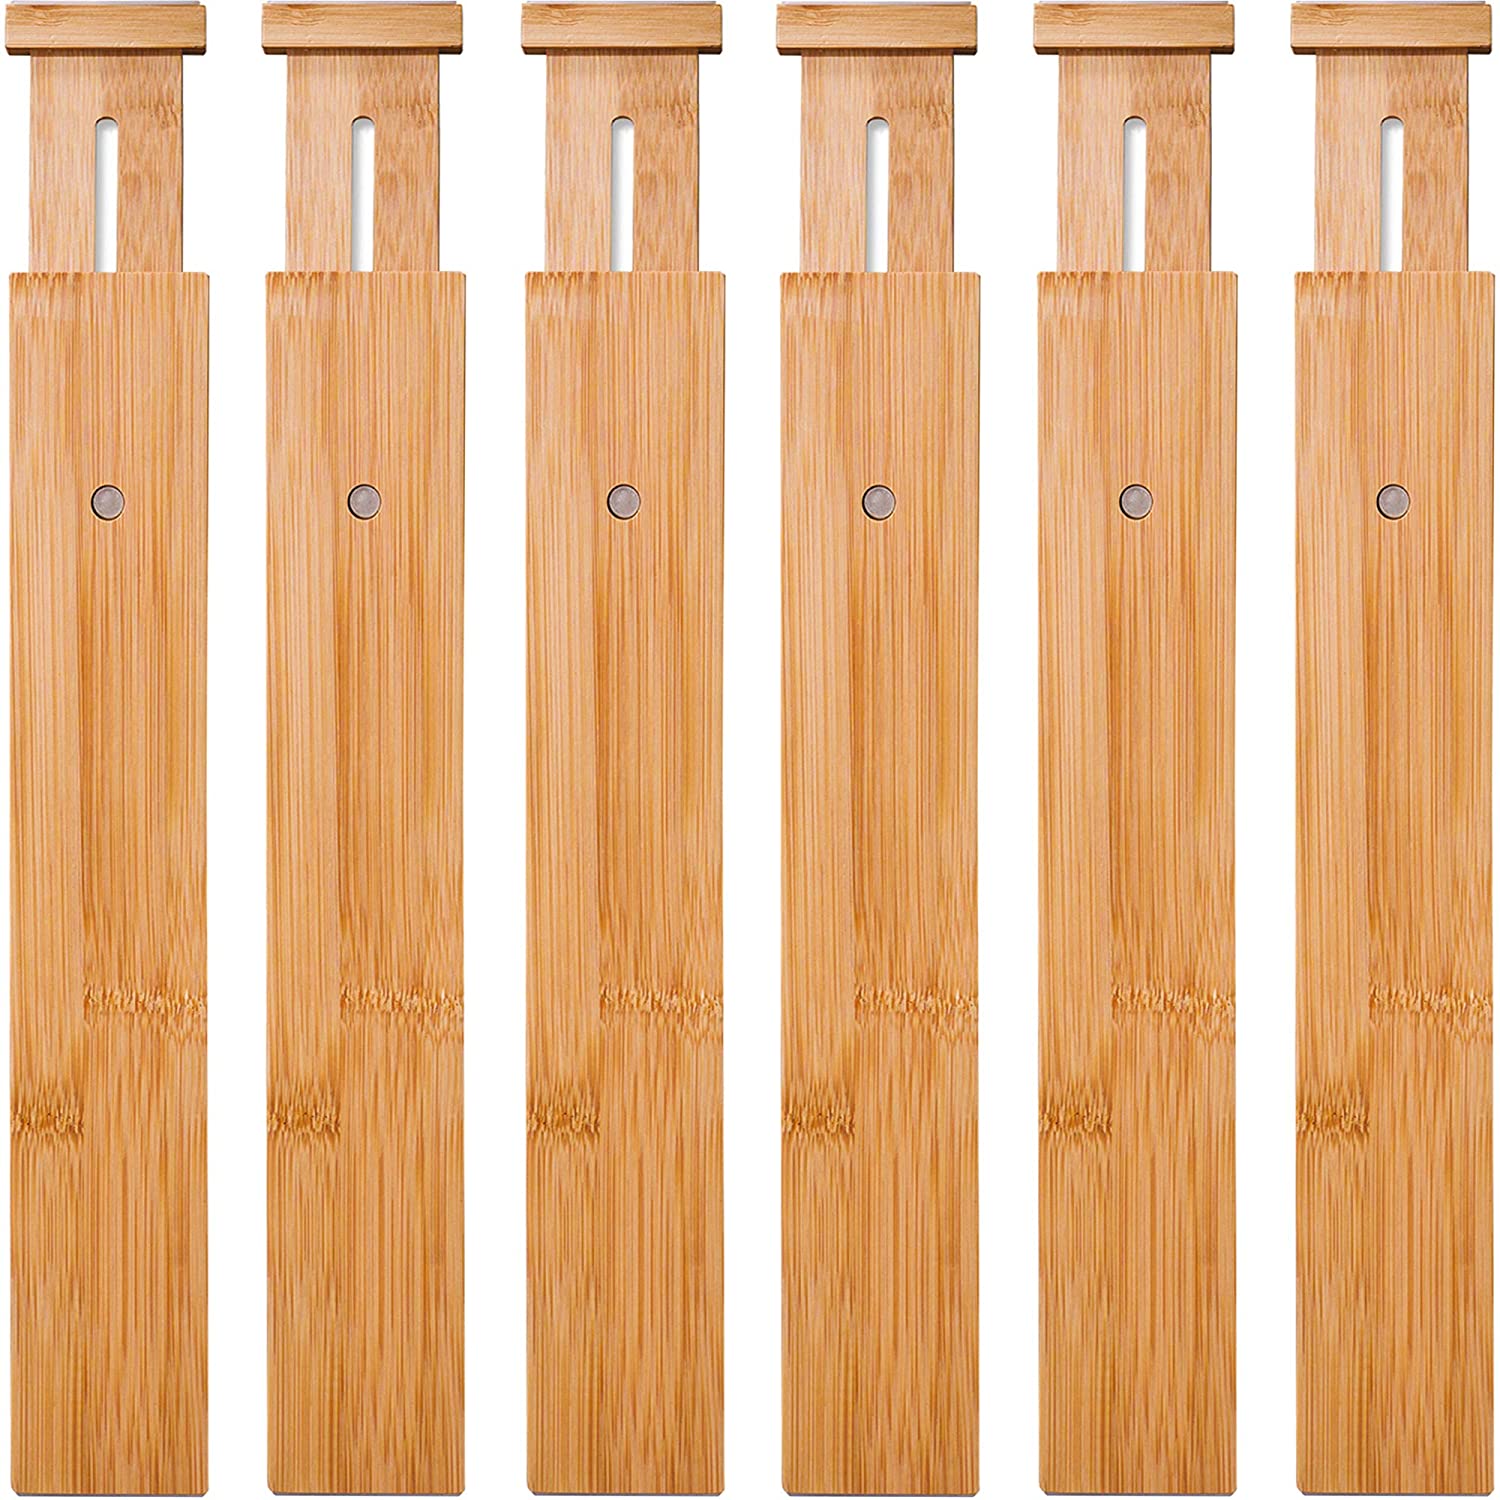 Bamboo wood drawer dividers set of 6